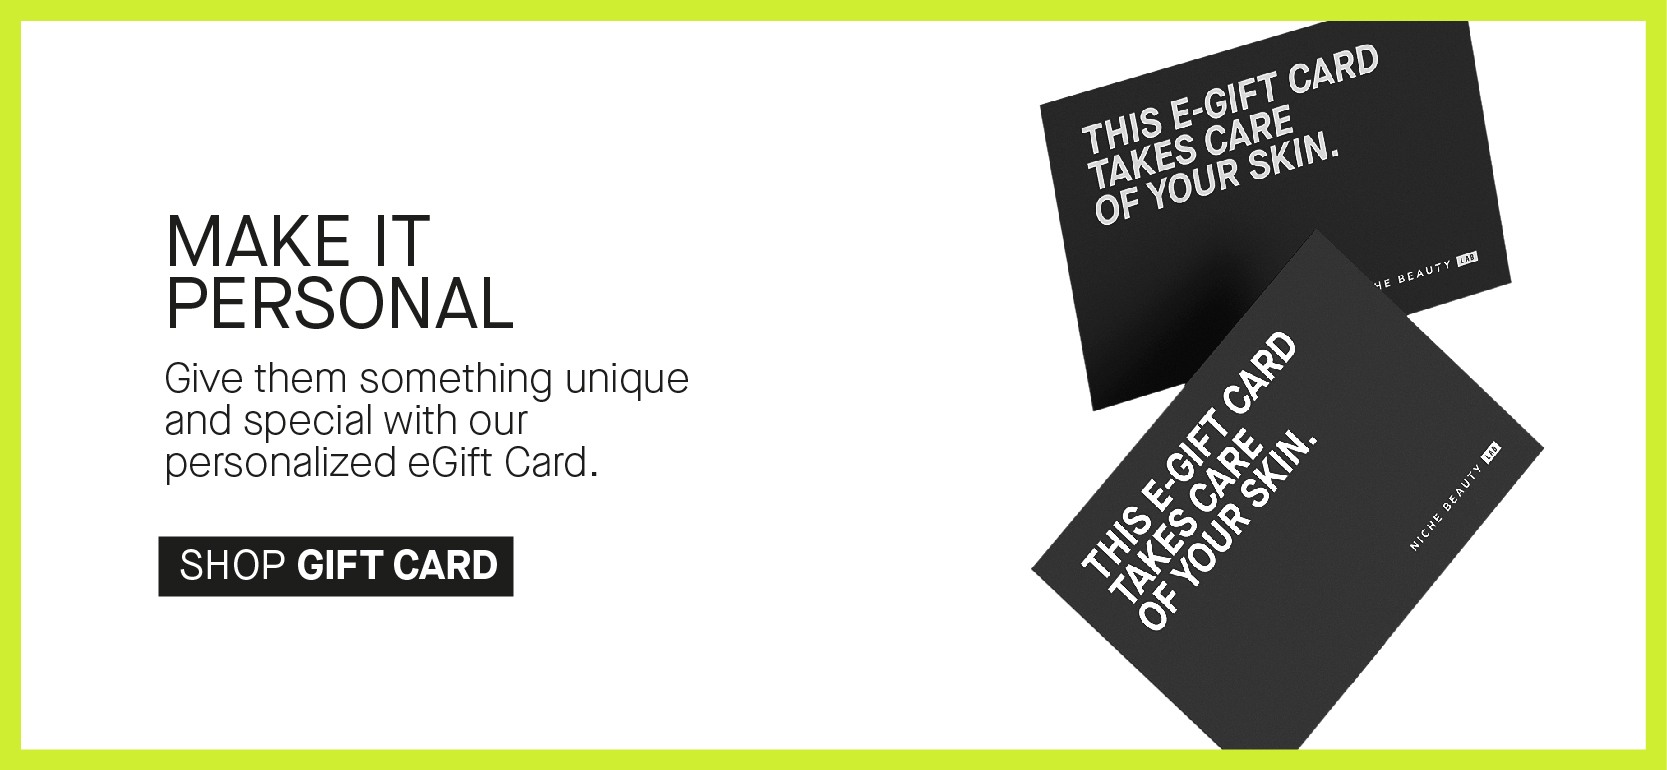 MAKE IT PERSONAL Give them something unique and special with our personalized eGift Card. SHOP GIFT CARD 